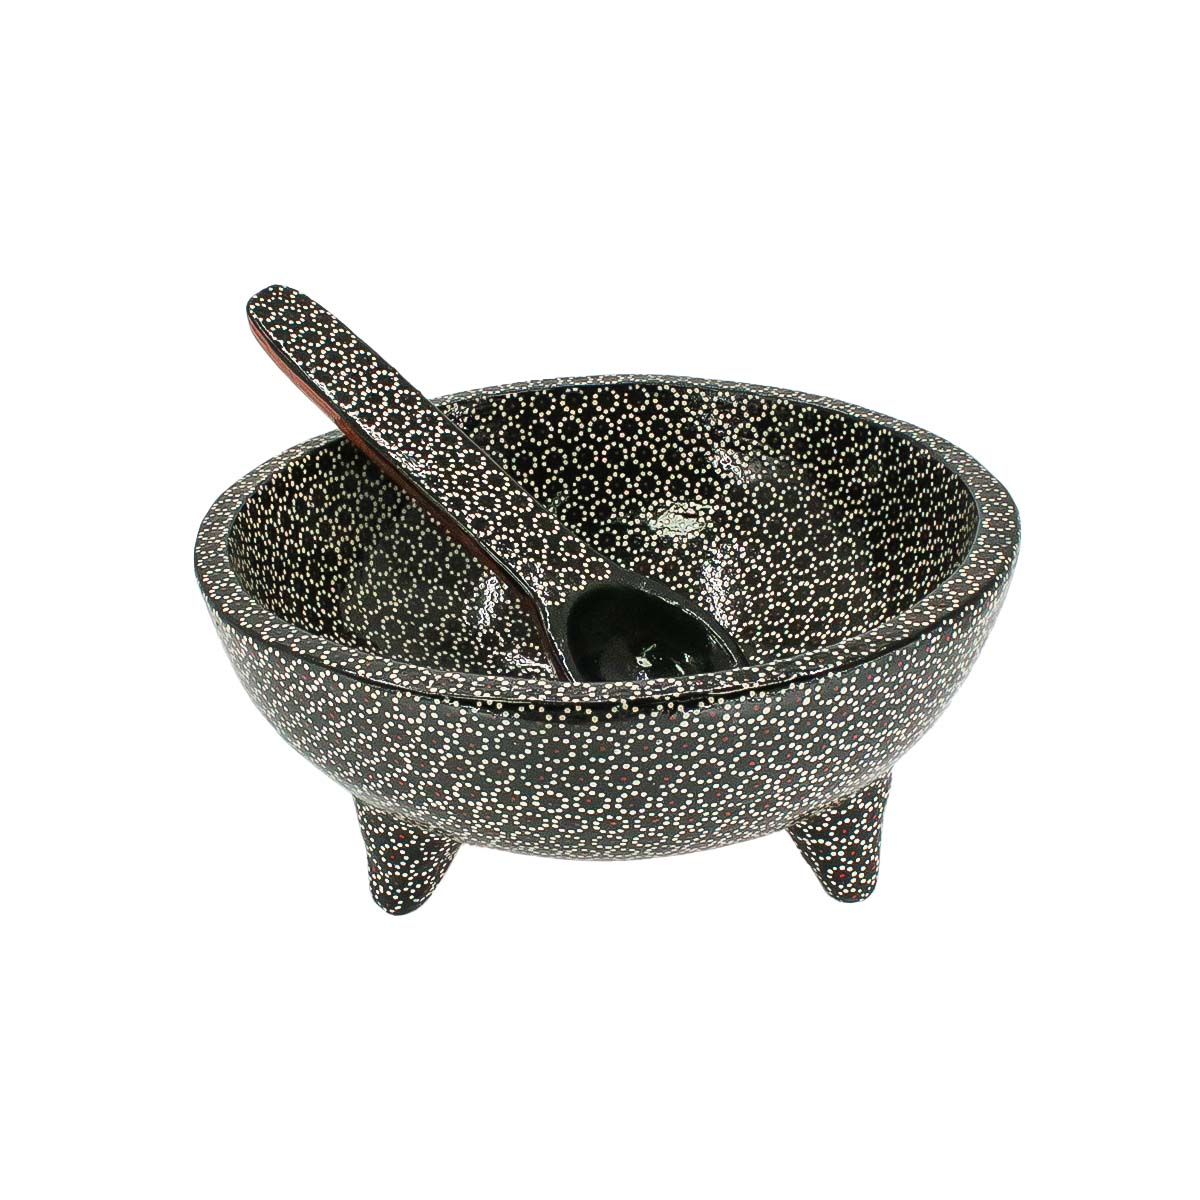 Large Capula Clay Molcajete Bowl and Matching Spoon - 3